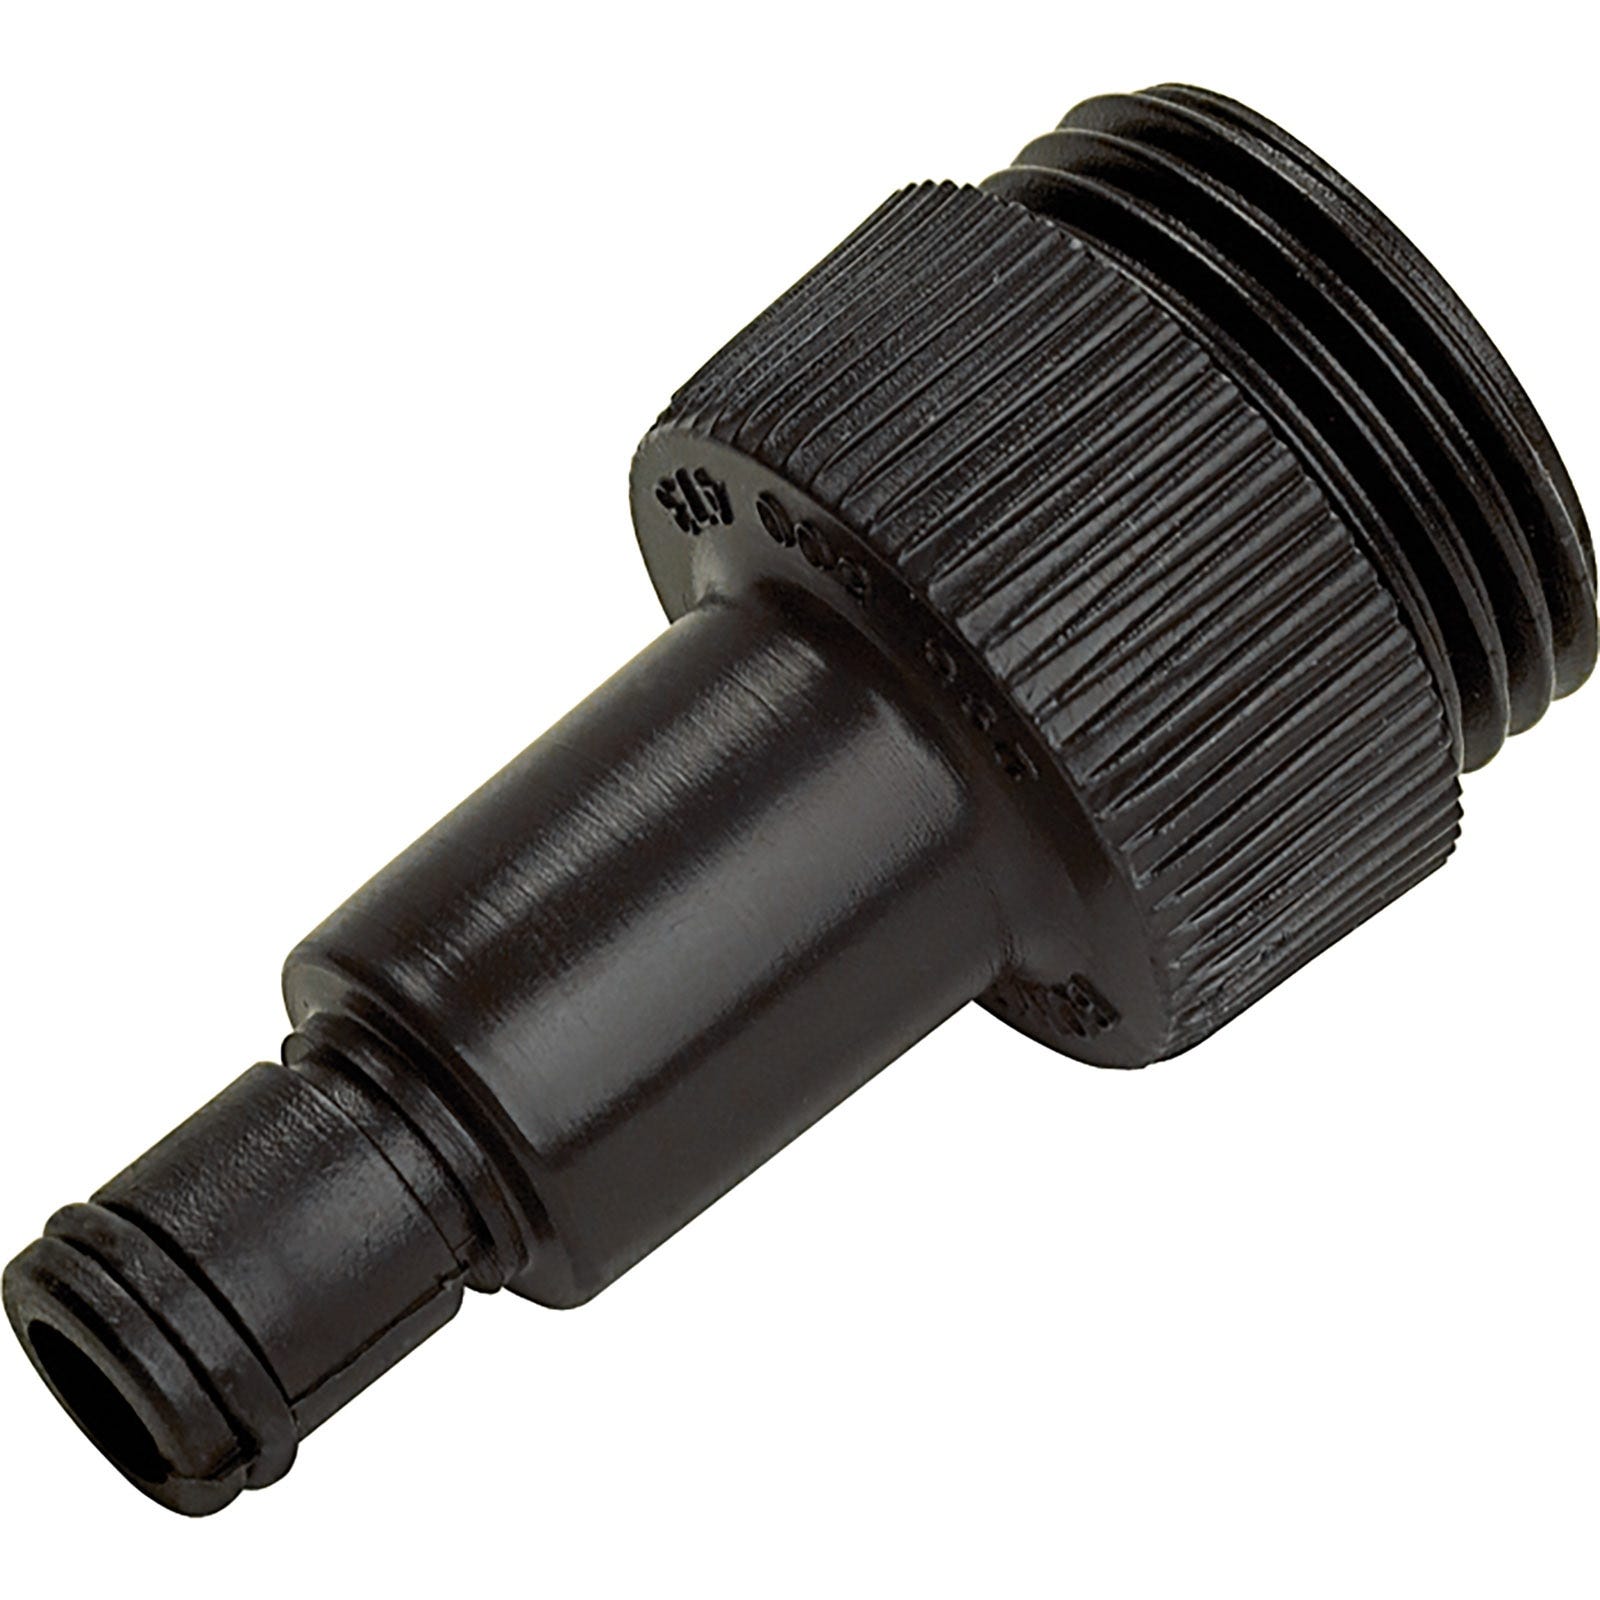 Flush Adapter - 295500473 - The Parts Lodge